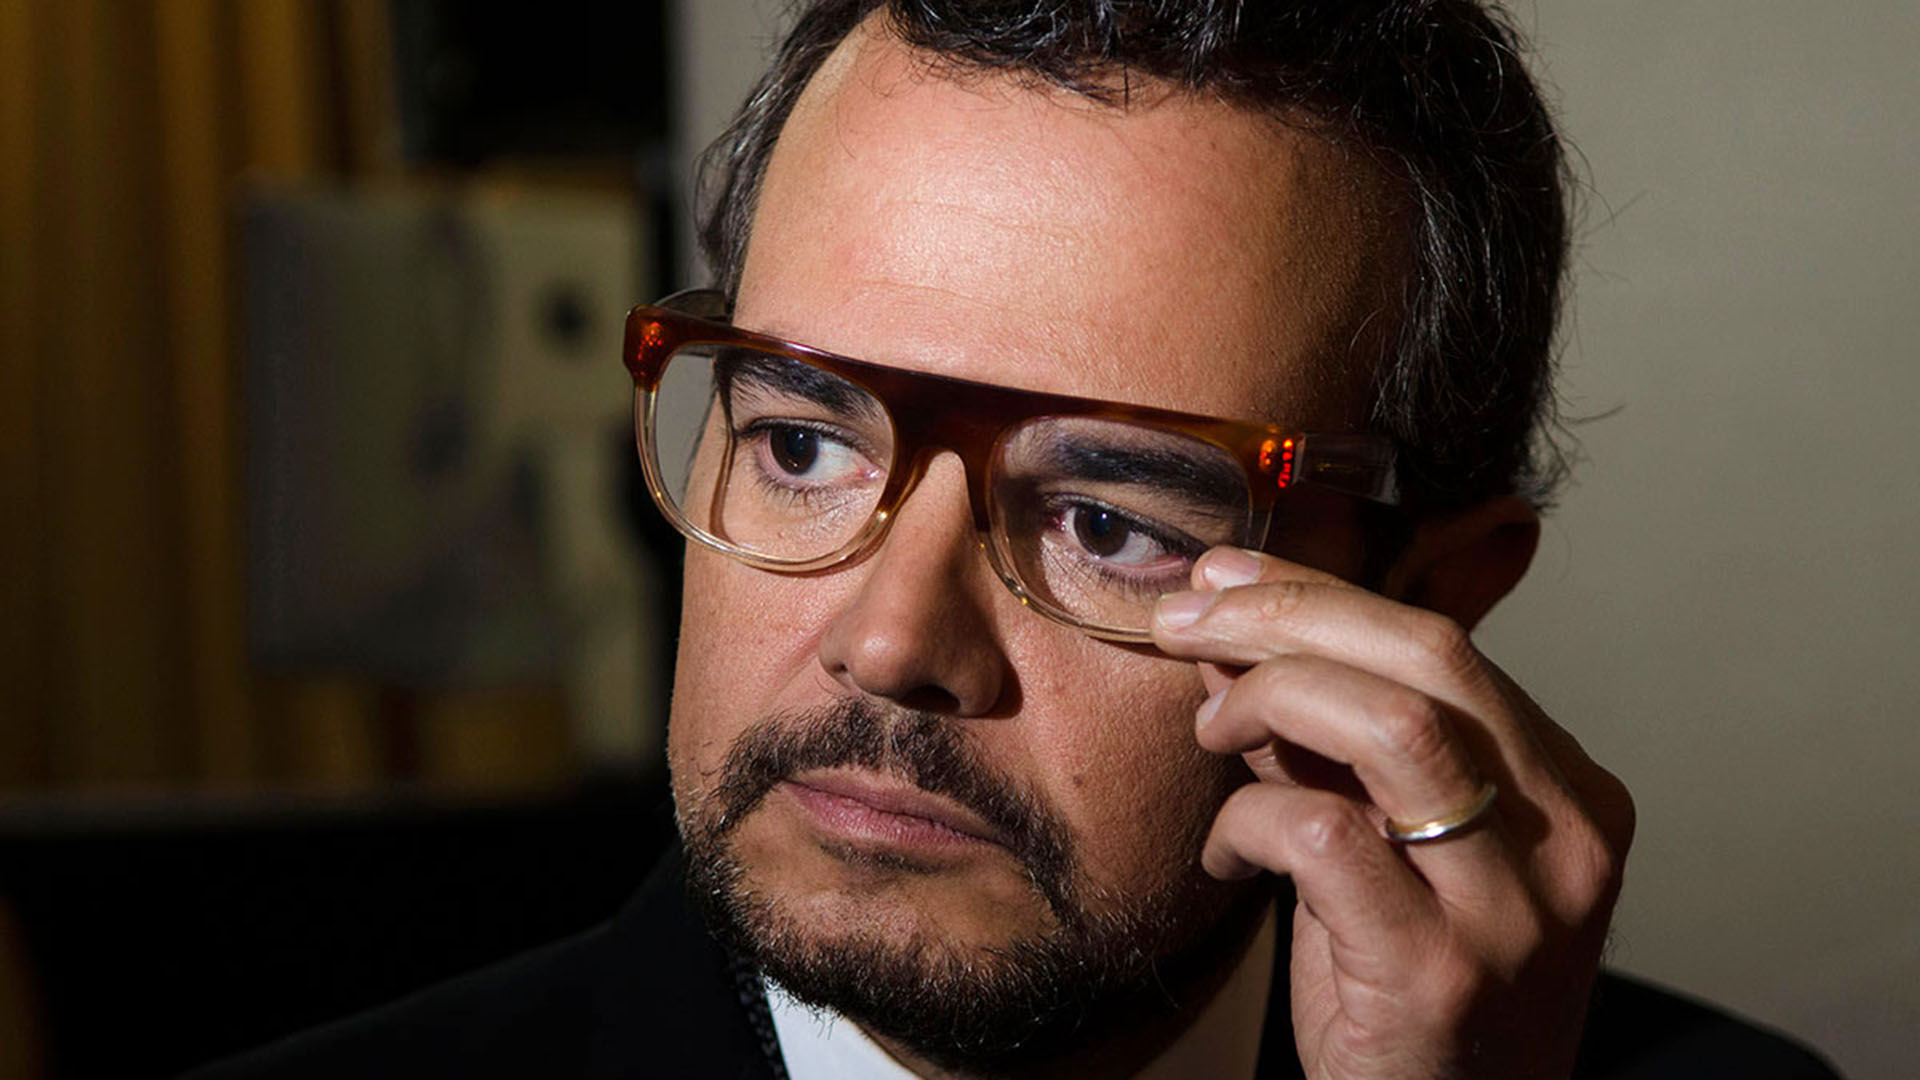 In 2018 Aleks Syntek was involved in a sex scandal (Photo: AP)